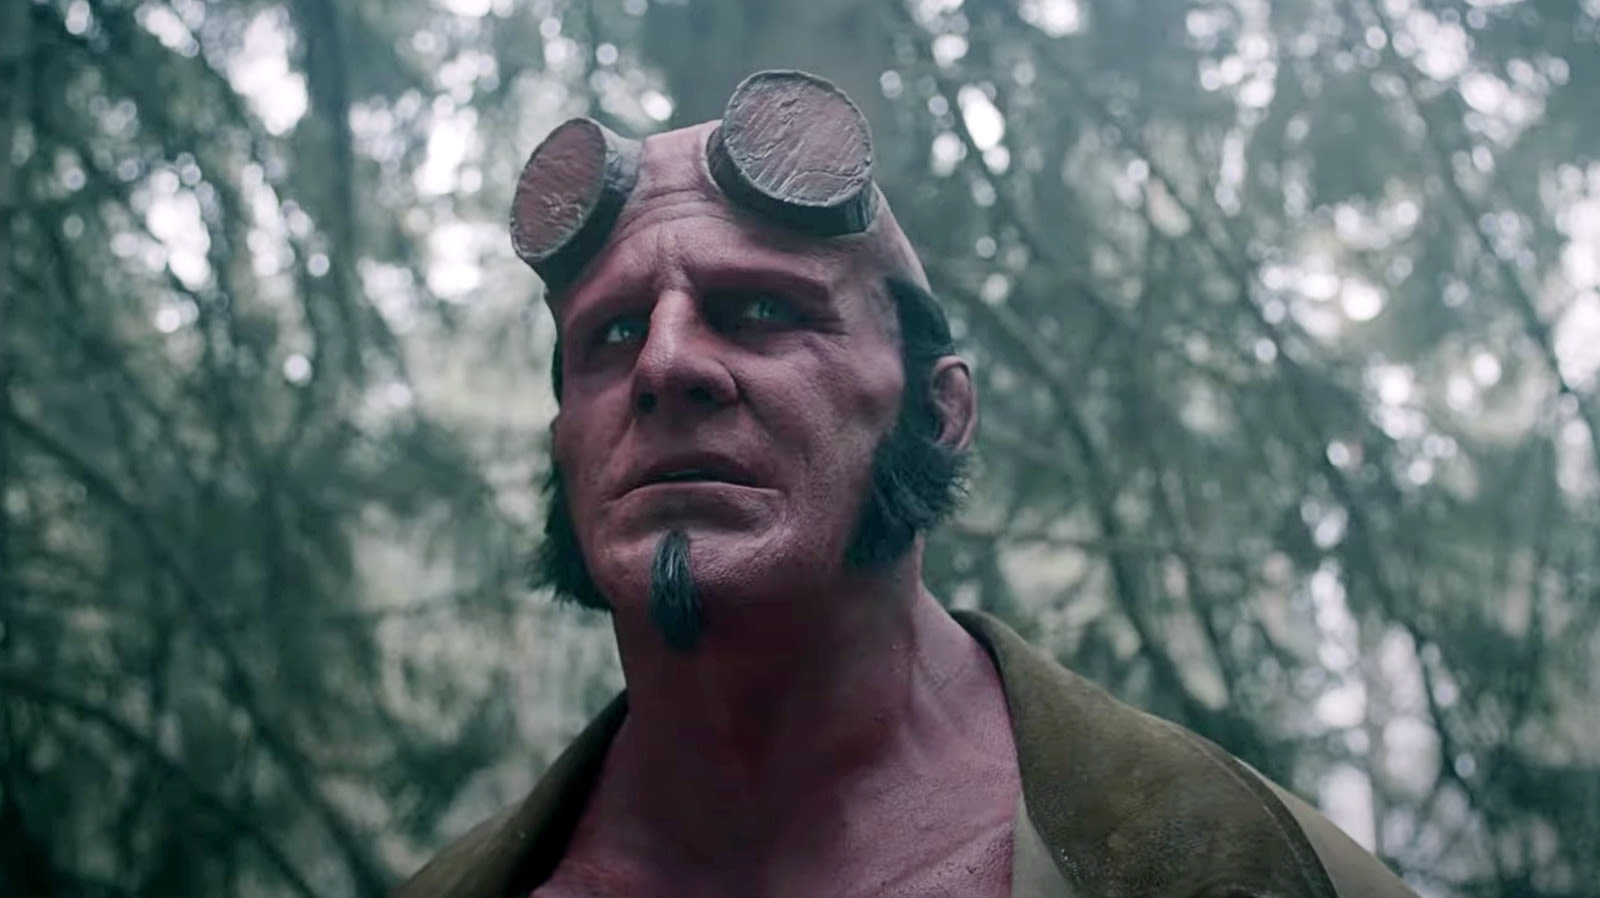 Hellboy Takes On Cabin In The Woods Horror In New Trailer For The Crooked Man - SlashFilm